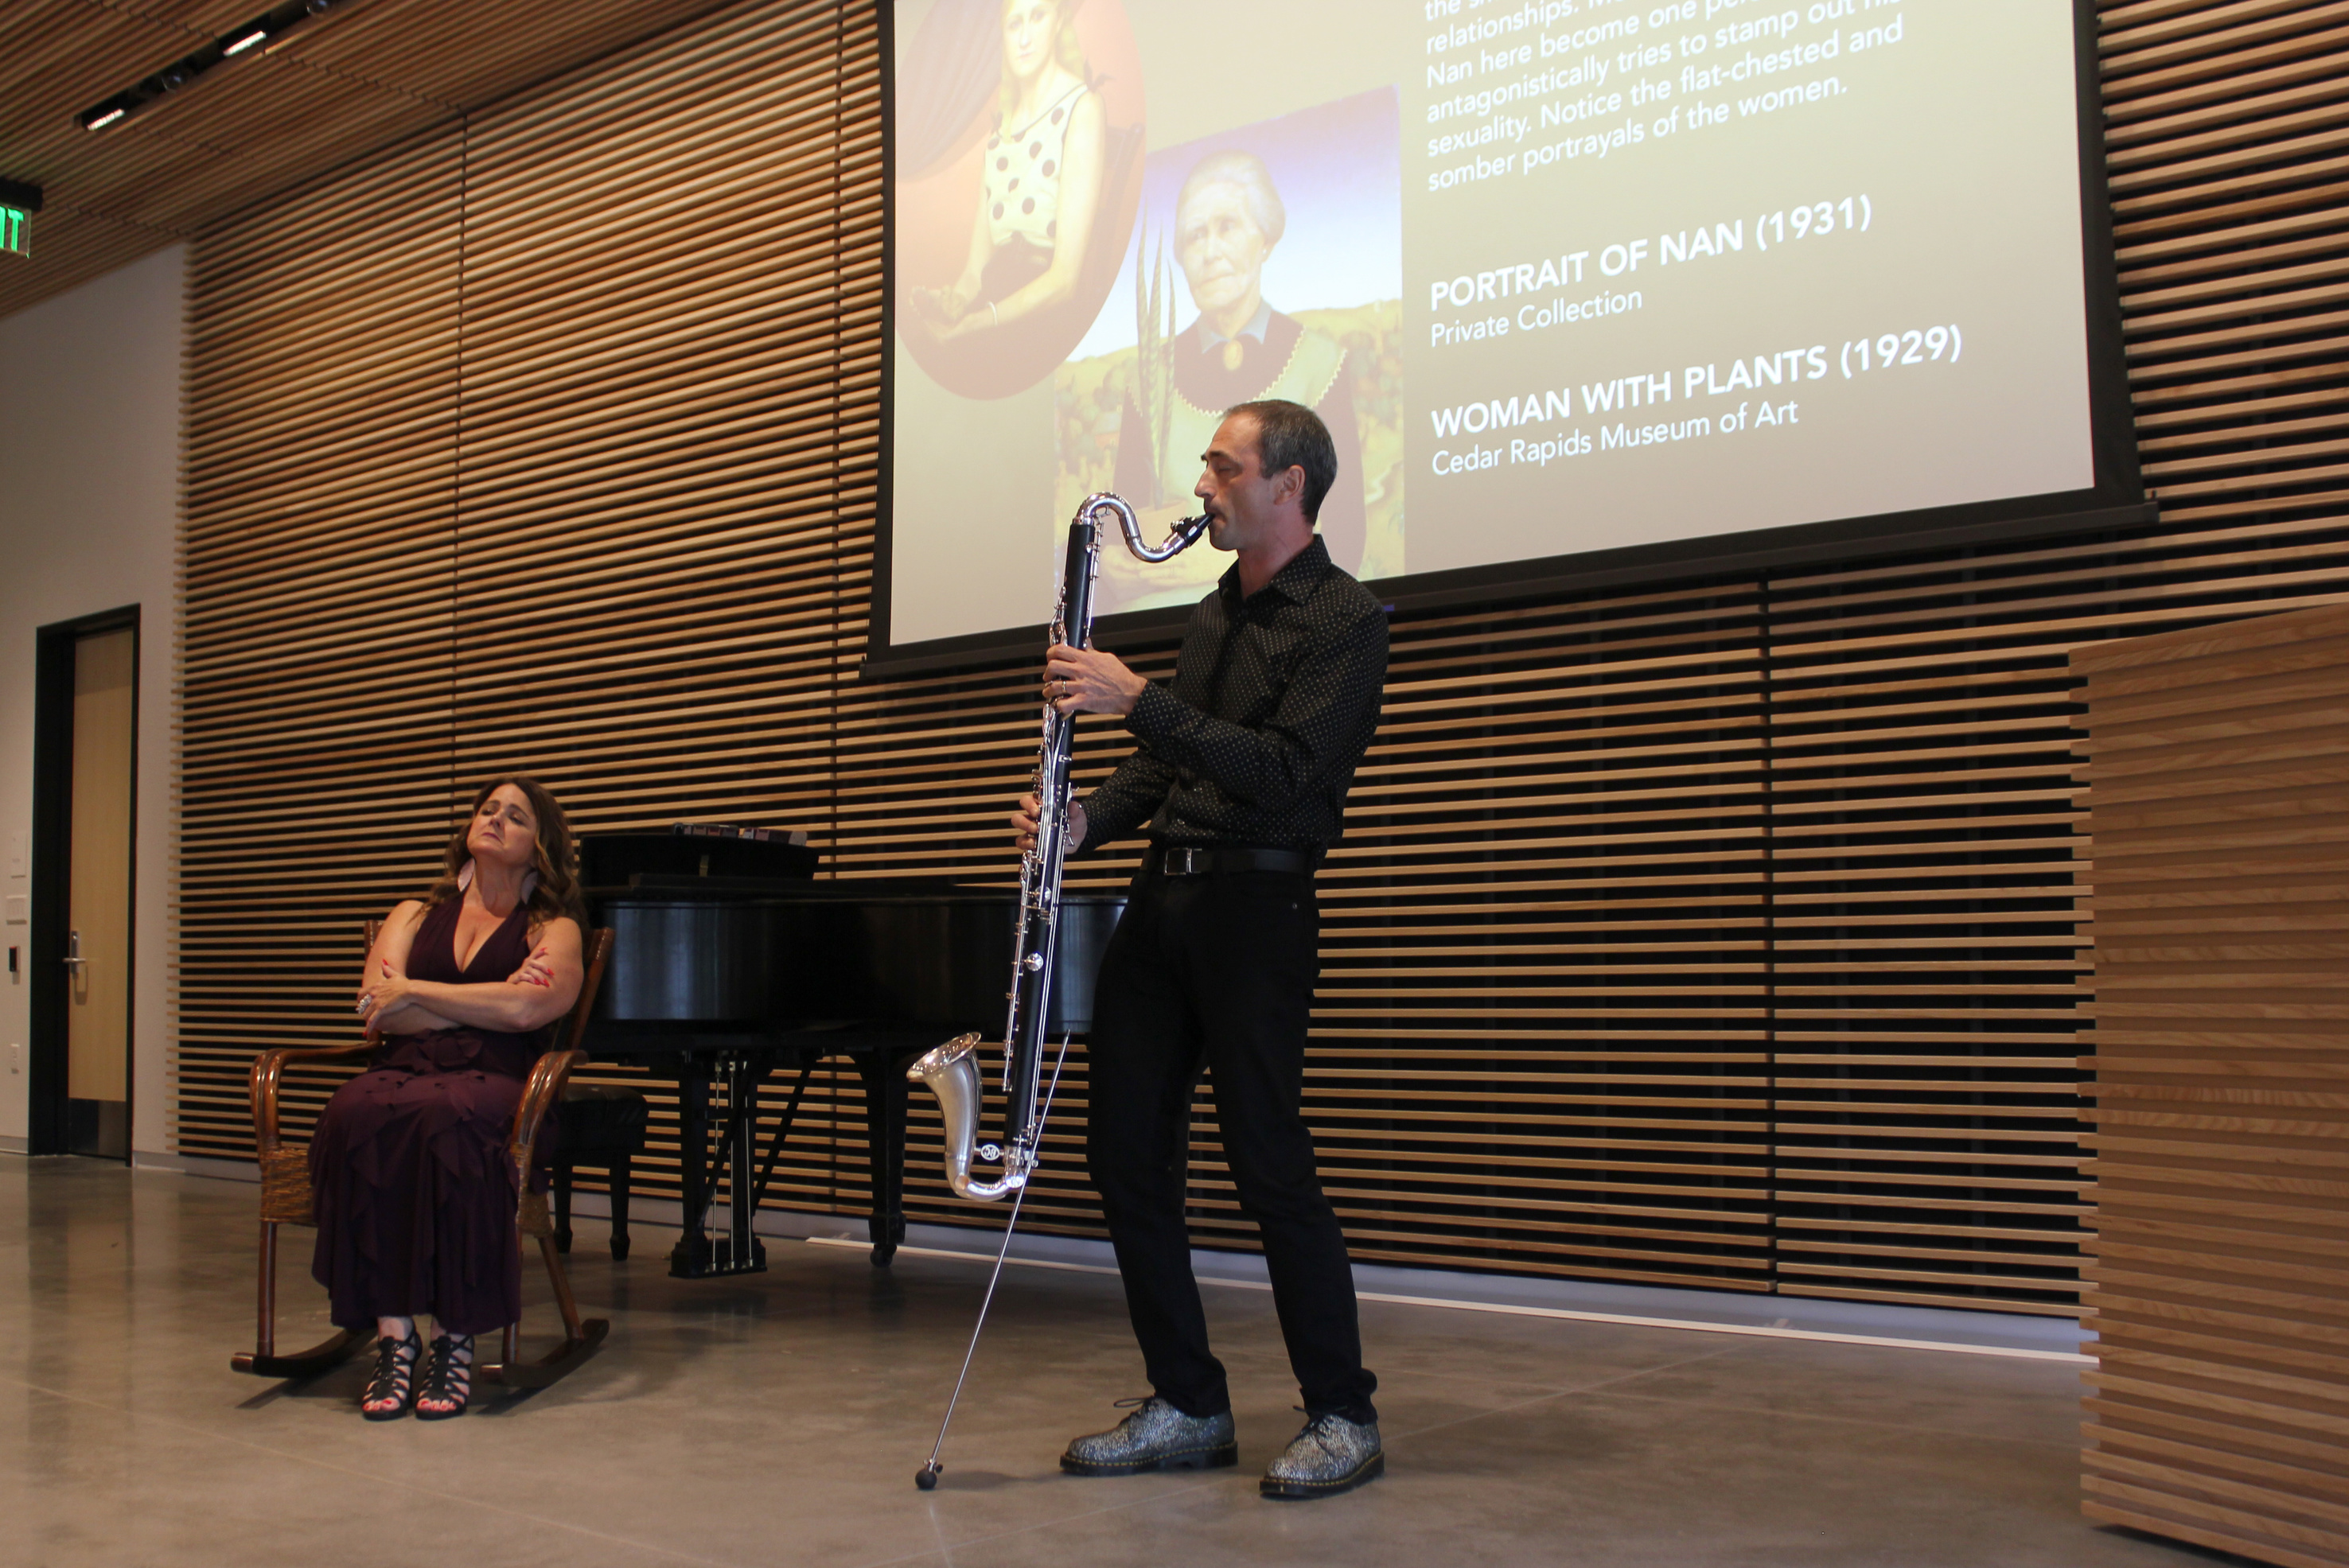 At left a woman in a dark purple dress sits in a rocking chair. At right a man stands playing a bass clarinet. 